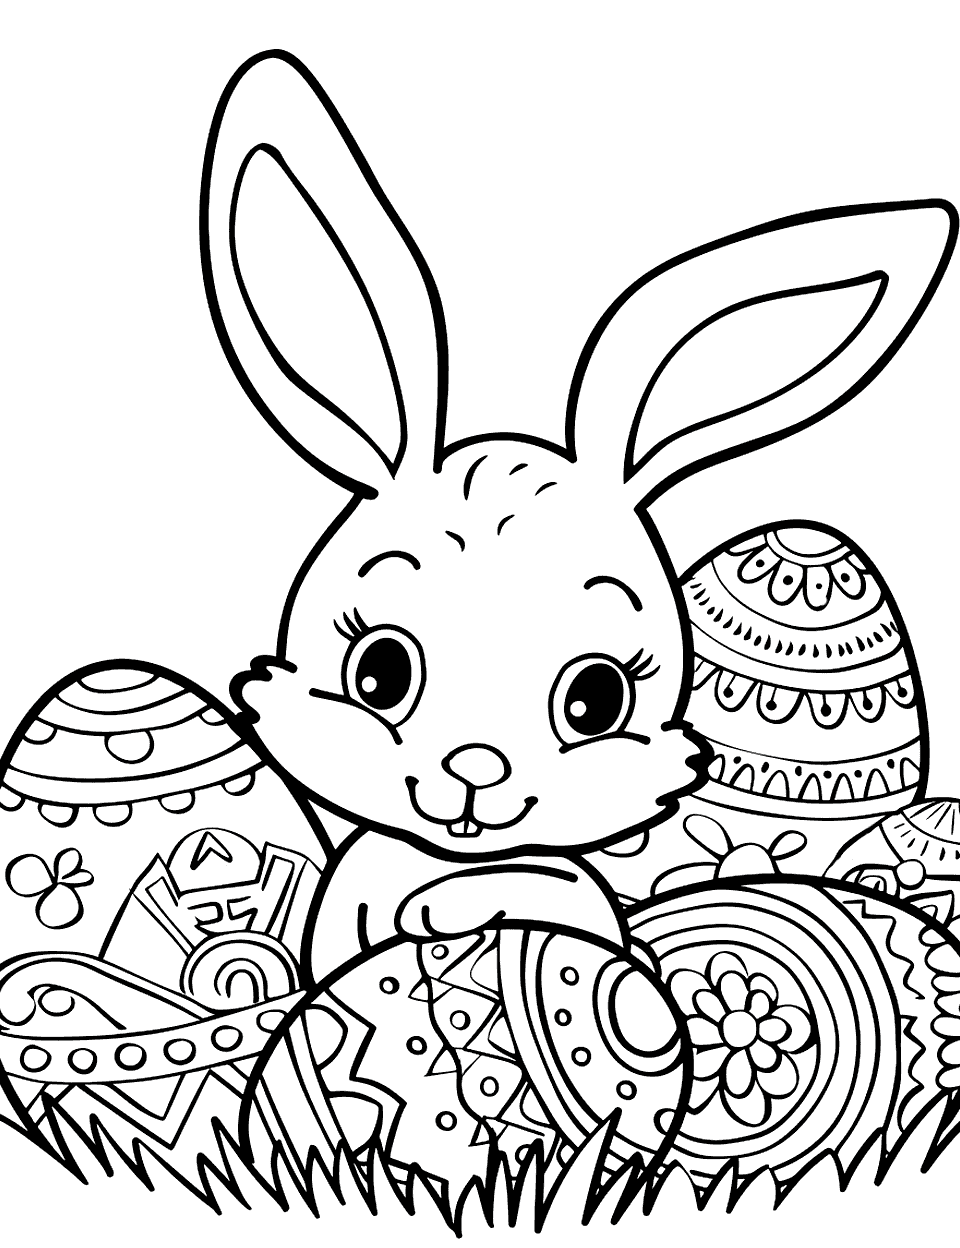 Bunny's Art Project Easter Bunny Coloring Page - A bunny surrounded by Easter eggs, each painted with a different pattern, as if the bunny has just finished decorating them.